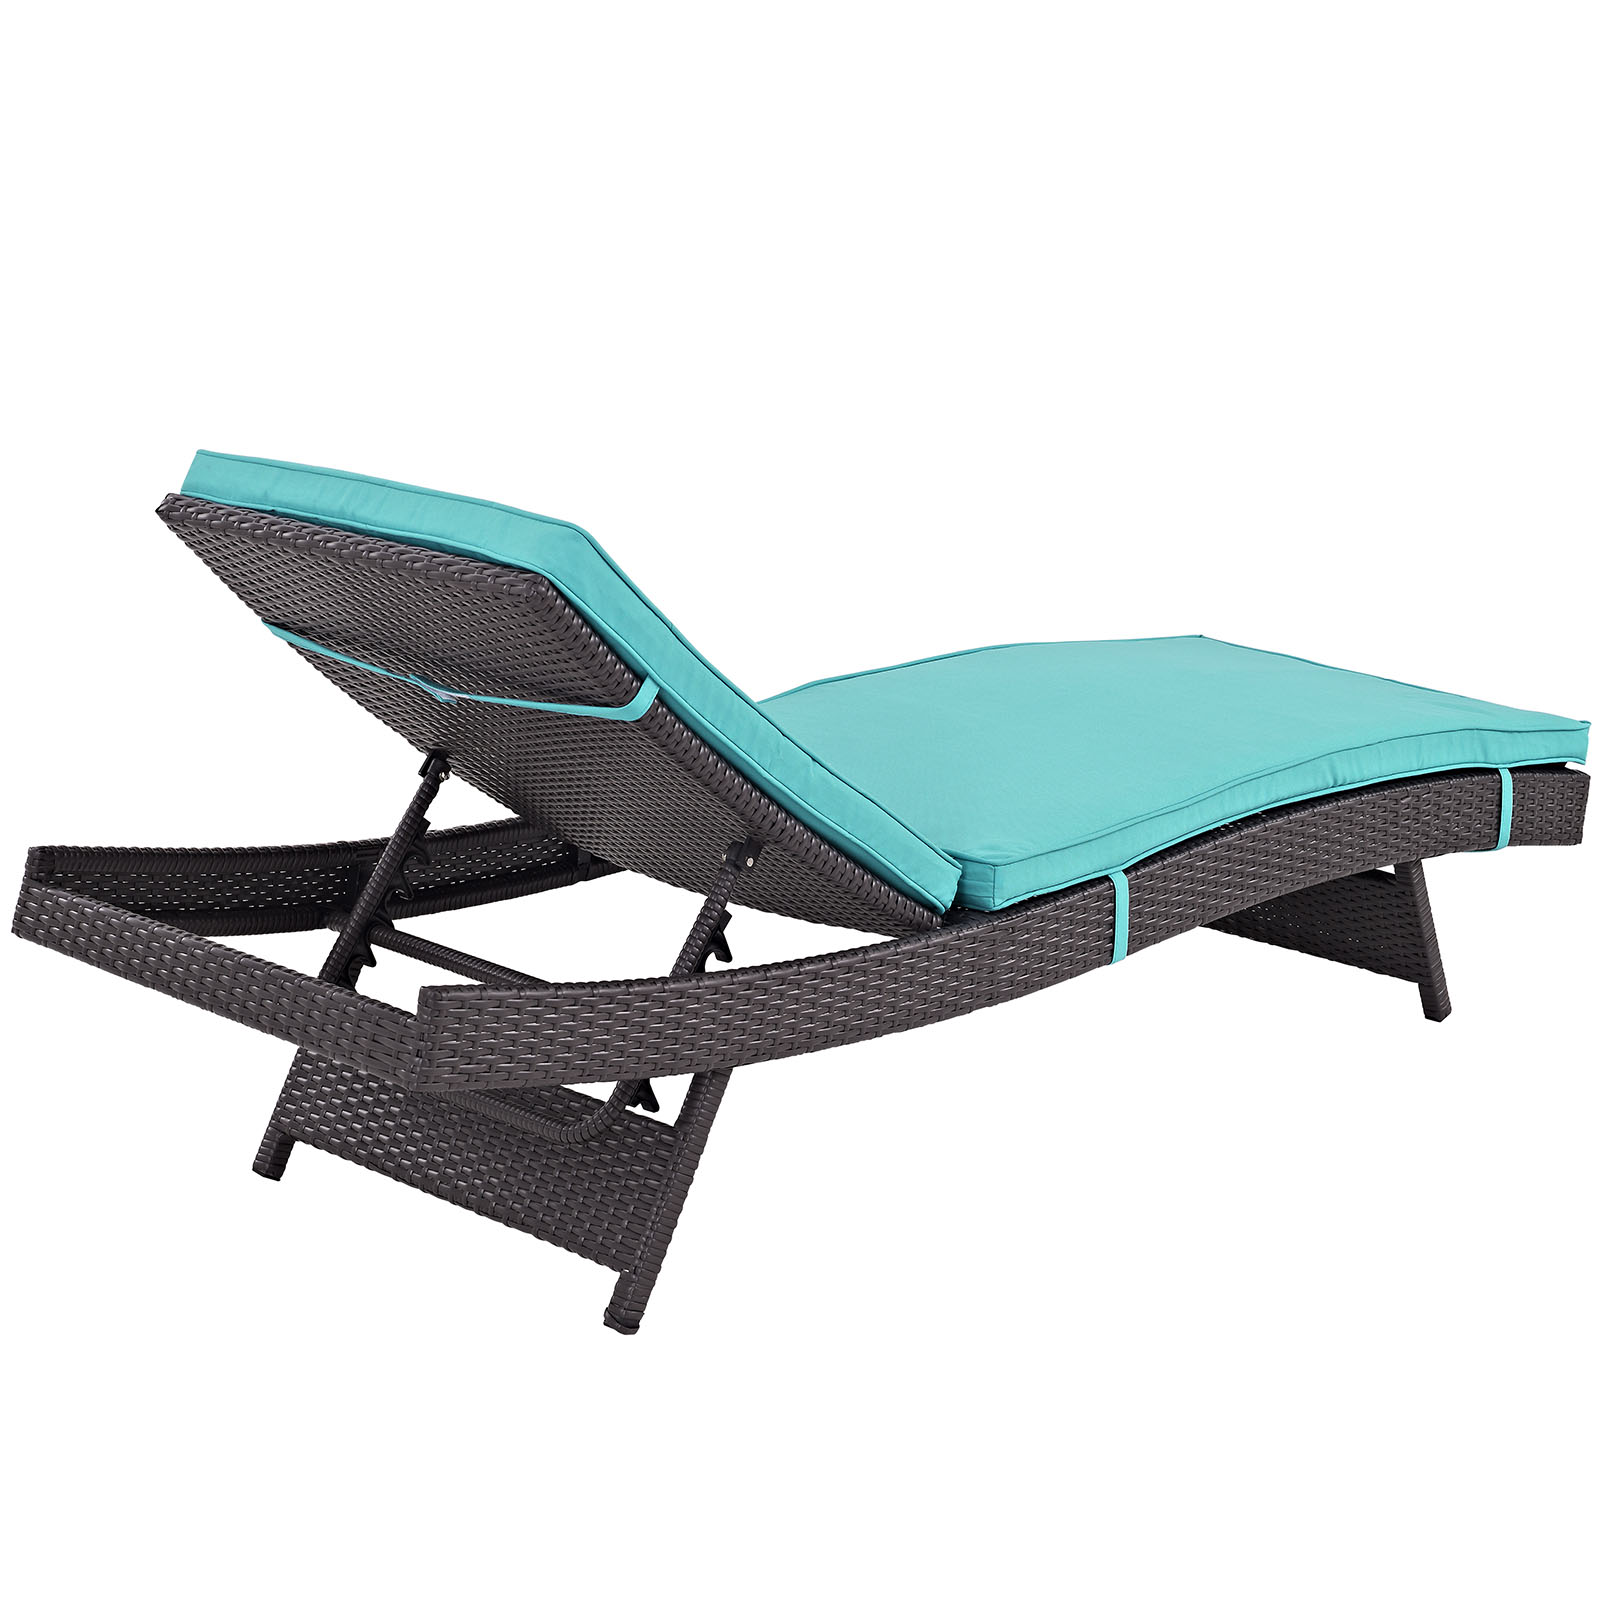 Modway Convene Chaise Outdoor Patio Set of 6 in Espresso Turquoise - image 5 of 5